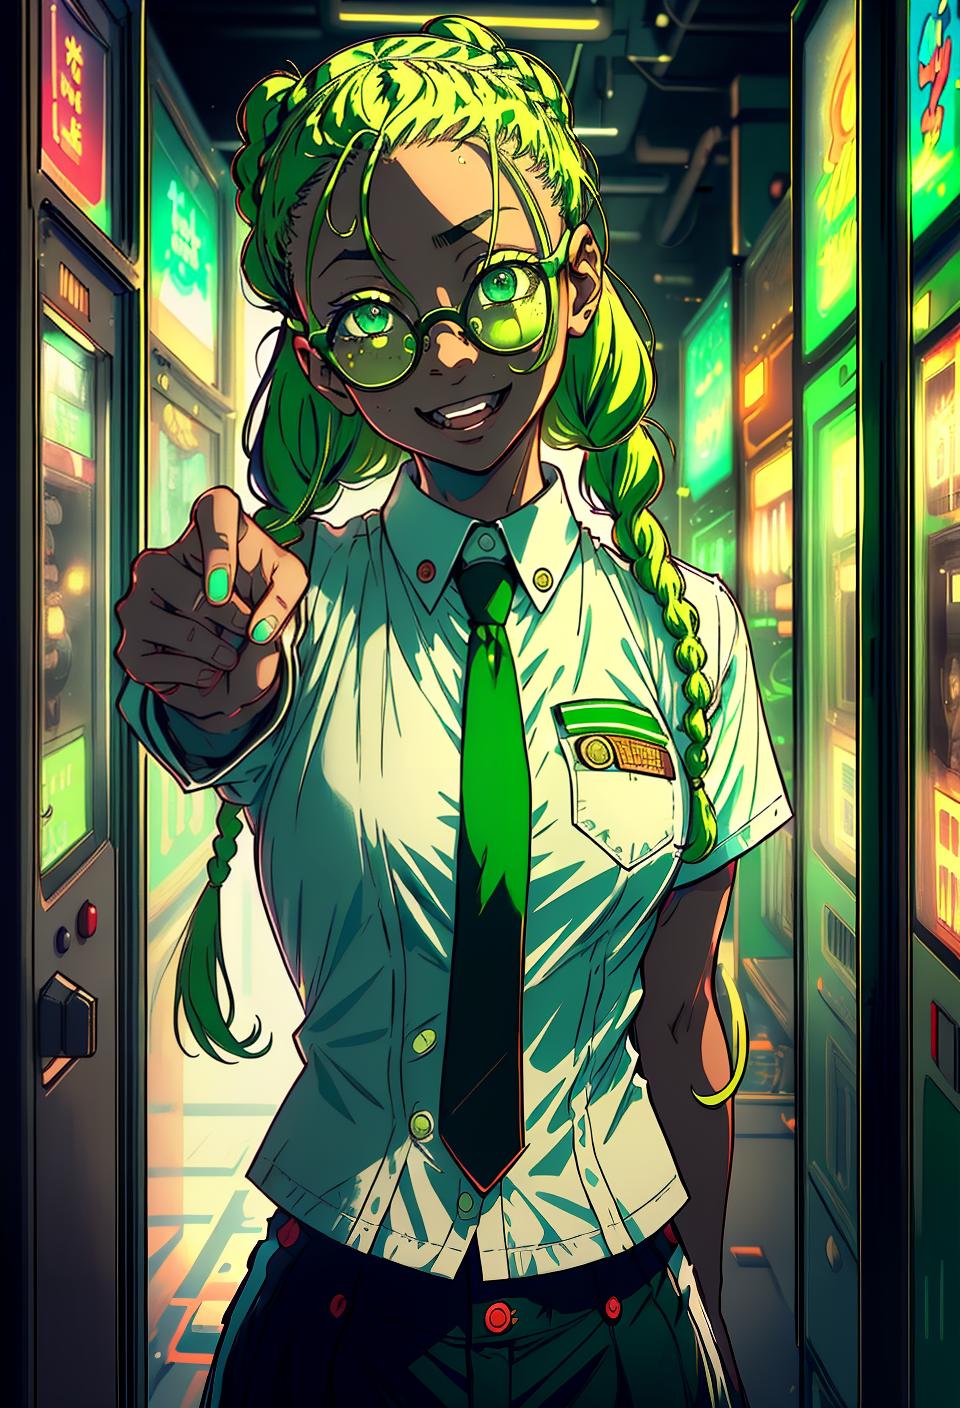  ((trending, highres, masterpiece, cinematic shot)), 1girl, young, female prison uniform, arcade scene, short wavy light green hair, hair in braids, large green eyes, psychopath, crazy personality, happy expression, glasses, dark skin, lively, toned